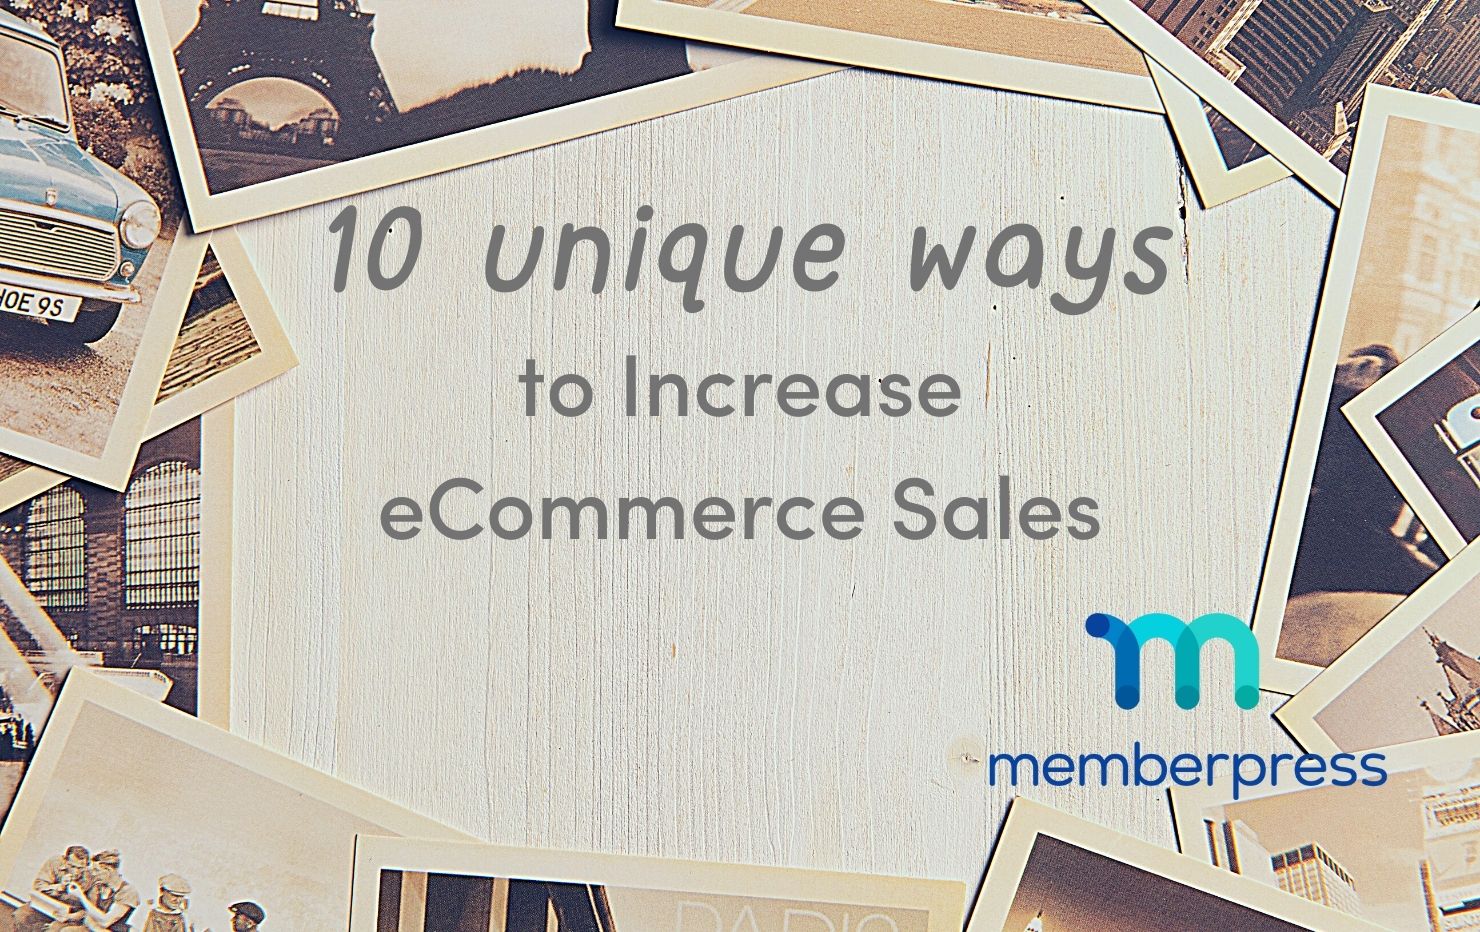 A collection of photographs ring around the words 10 unique ways to increase ecommerce sales The MemberPress Blogs logo is present